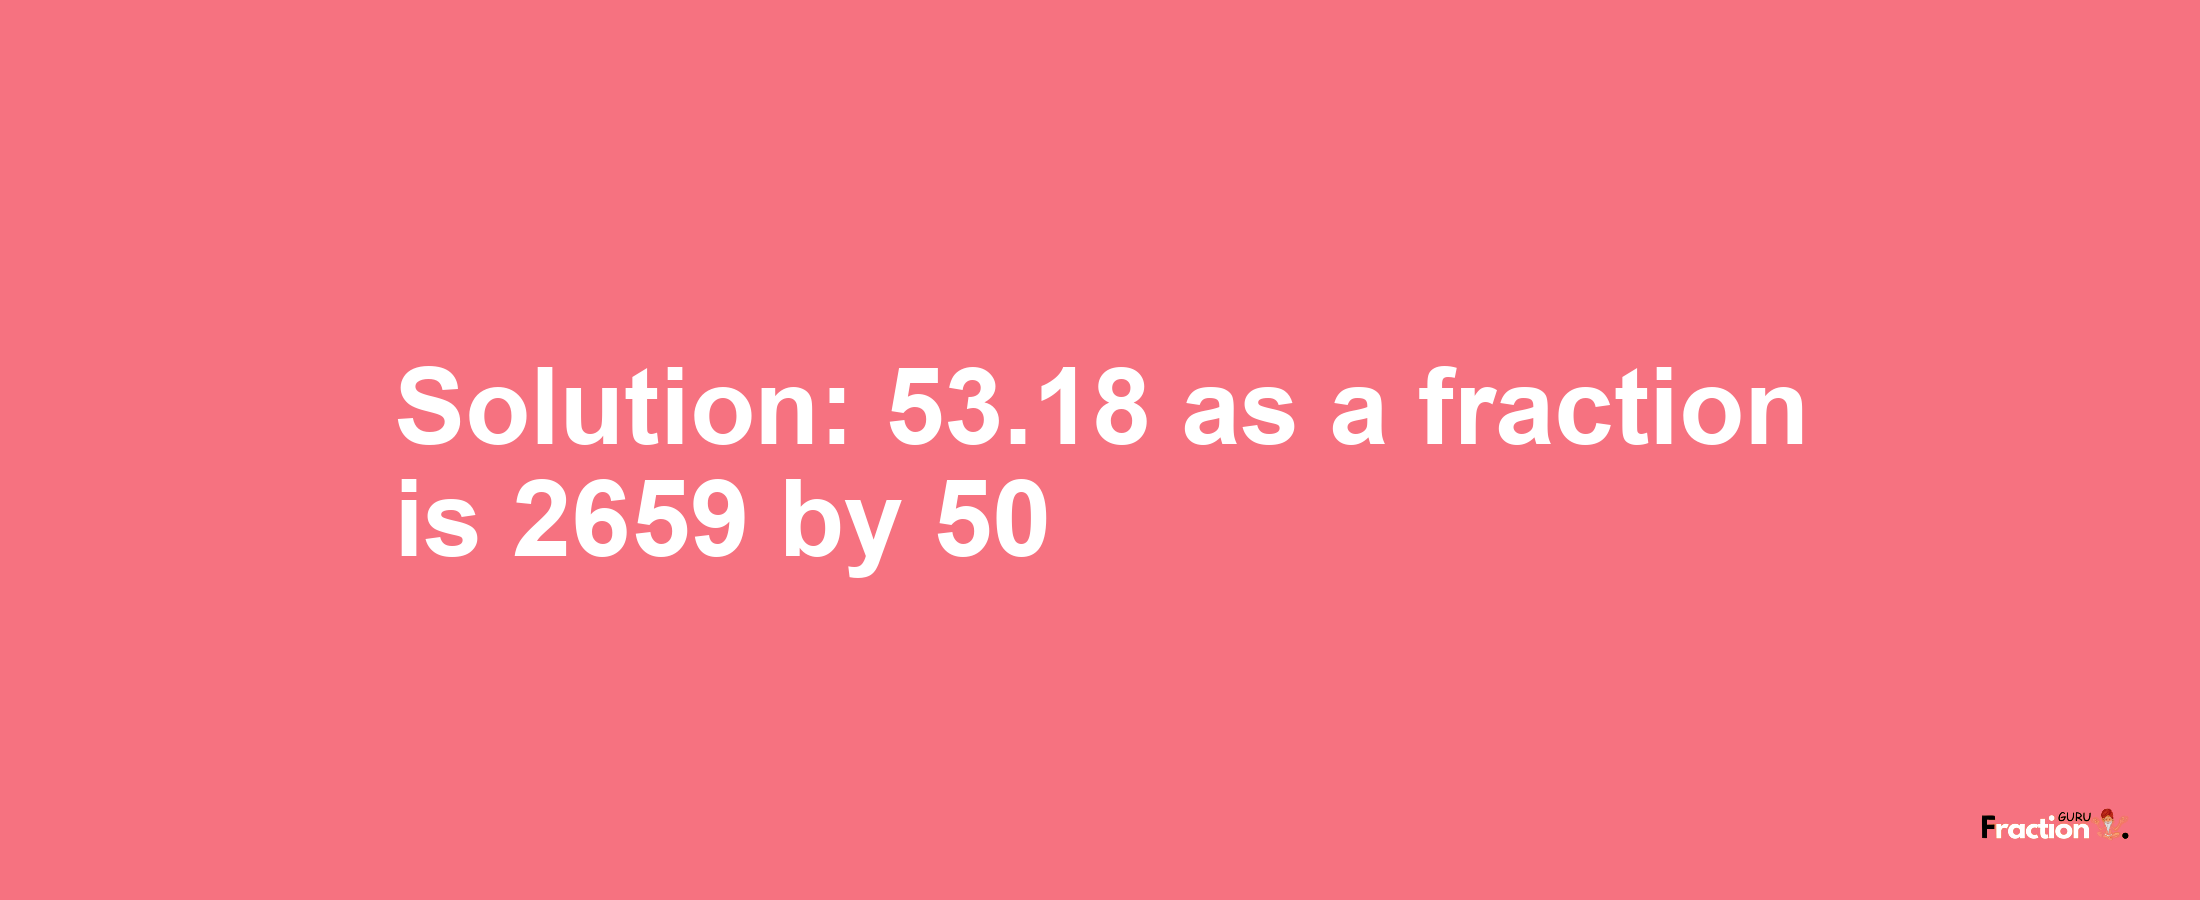 Solution:53.18 as a fraction is 2659/50